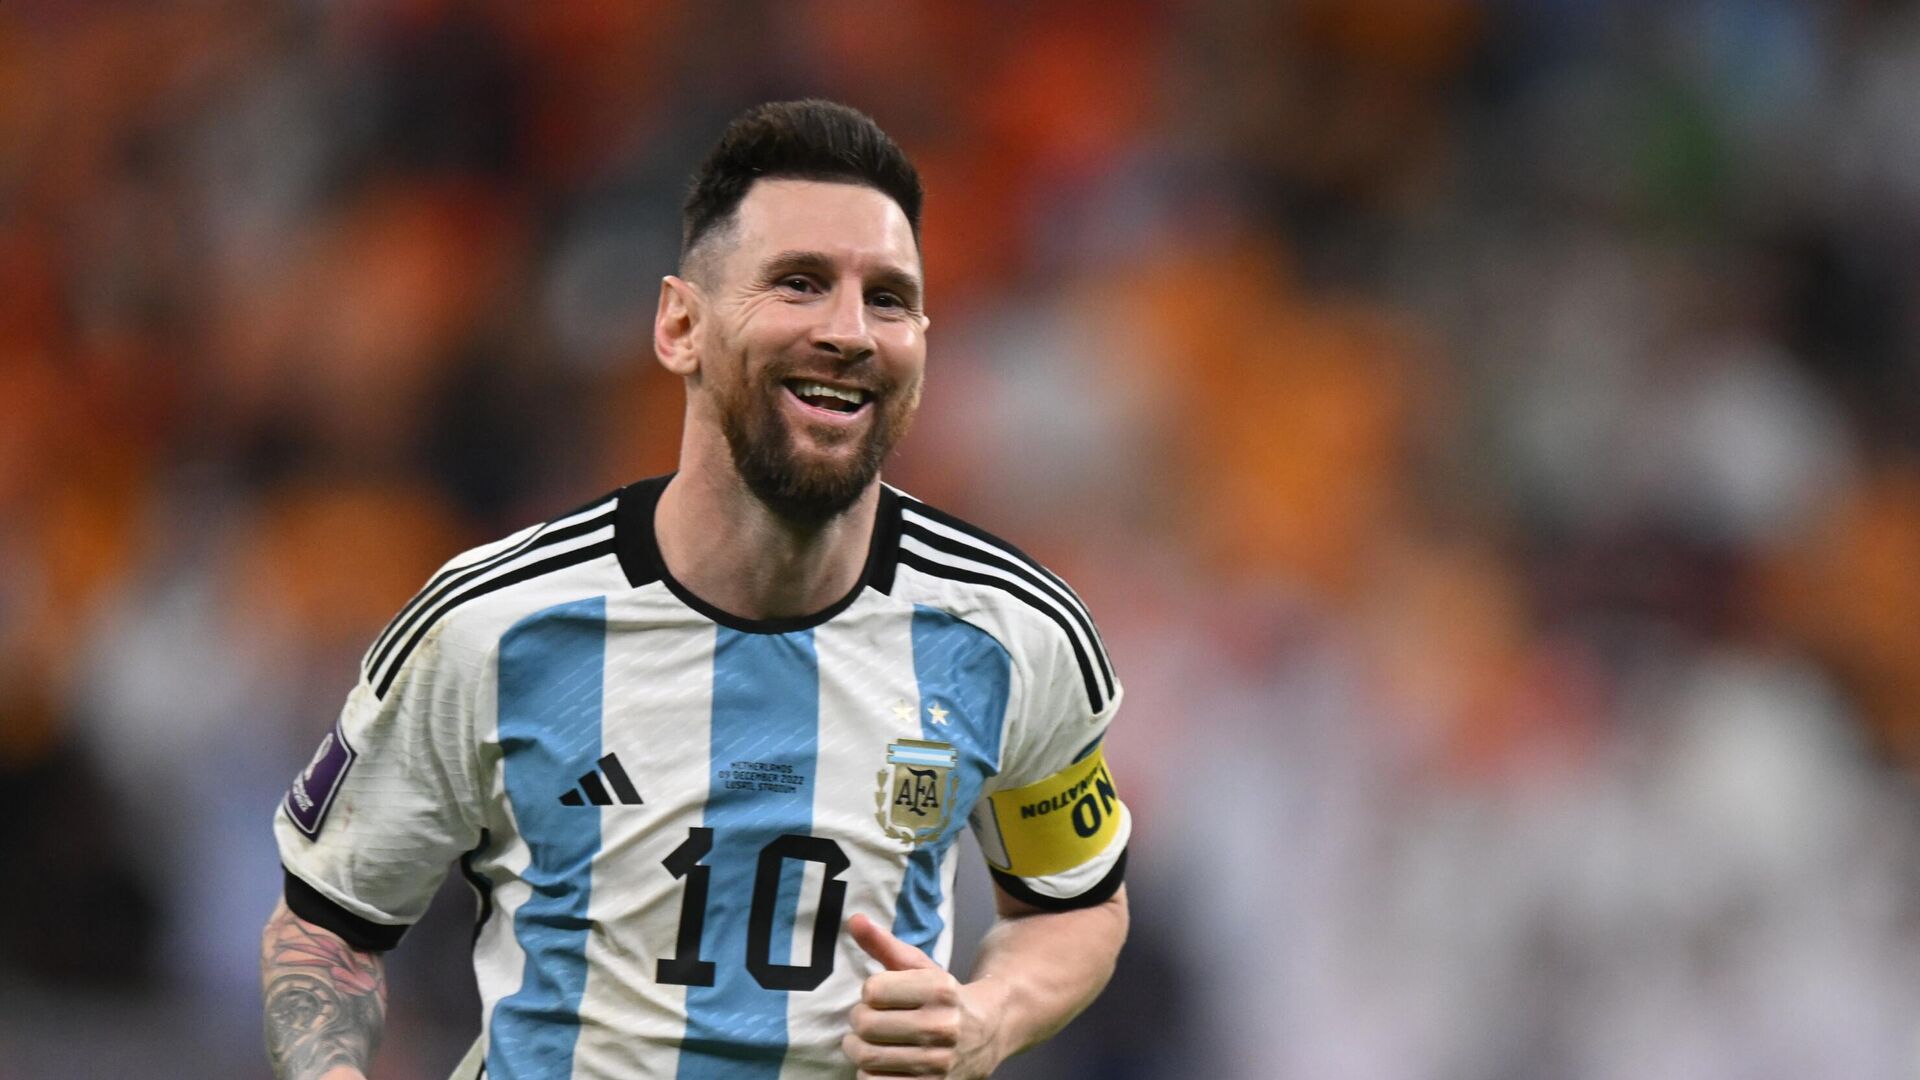 Lionel Messi during the match between Netherlands and Argentina at FIFA World Cup in Qatar - Sputnik India, 1920, 13.12.2022